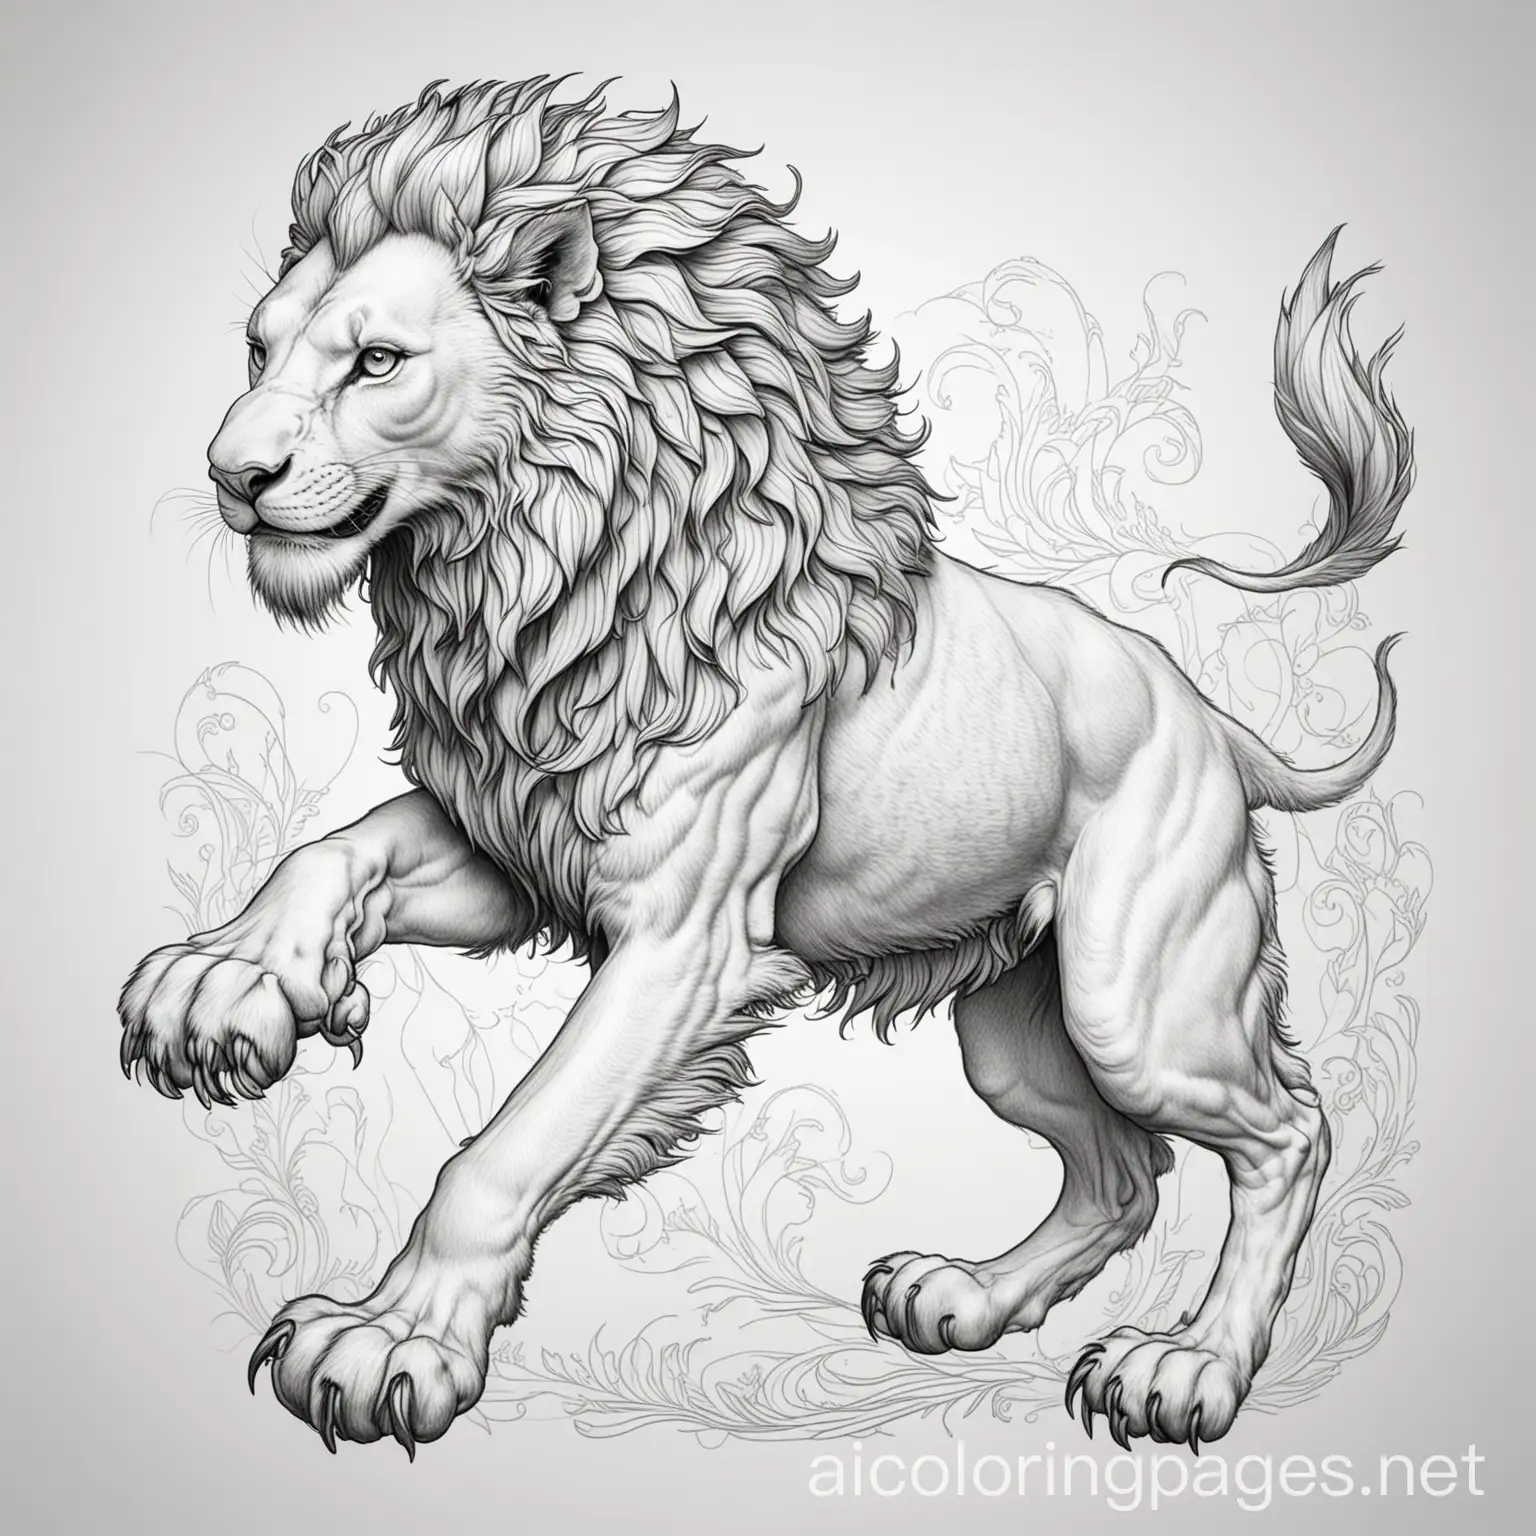 Playful griffin with a lion's body, Coloring Page, black and white, line art, white background, Simplicity, Ample White Space. The background of the coloring page is plain white to make it easy for young children to color within the lines. The outlines of all the subjects are easy to distinguish, making it simple for kids to color without too much difficulty